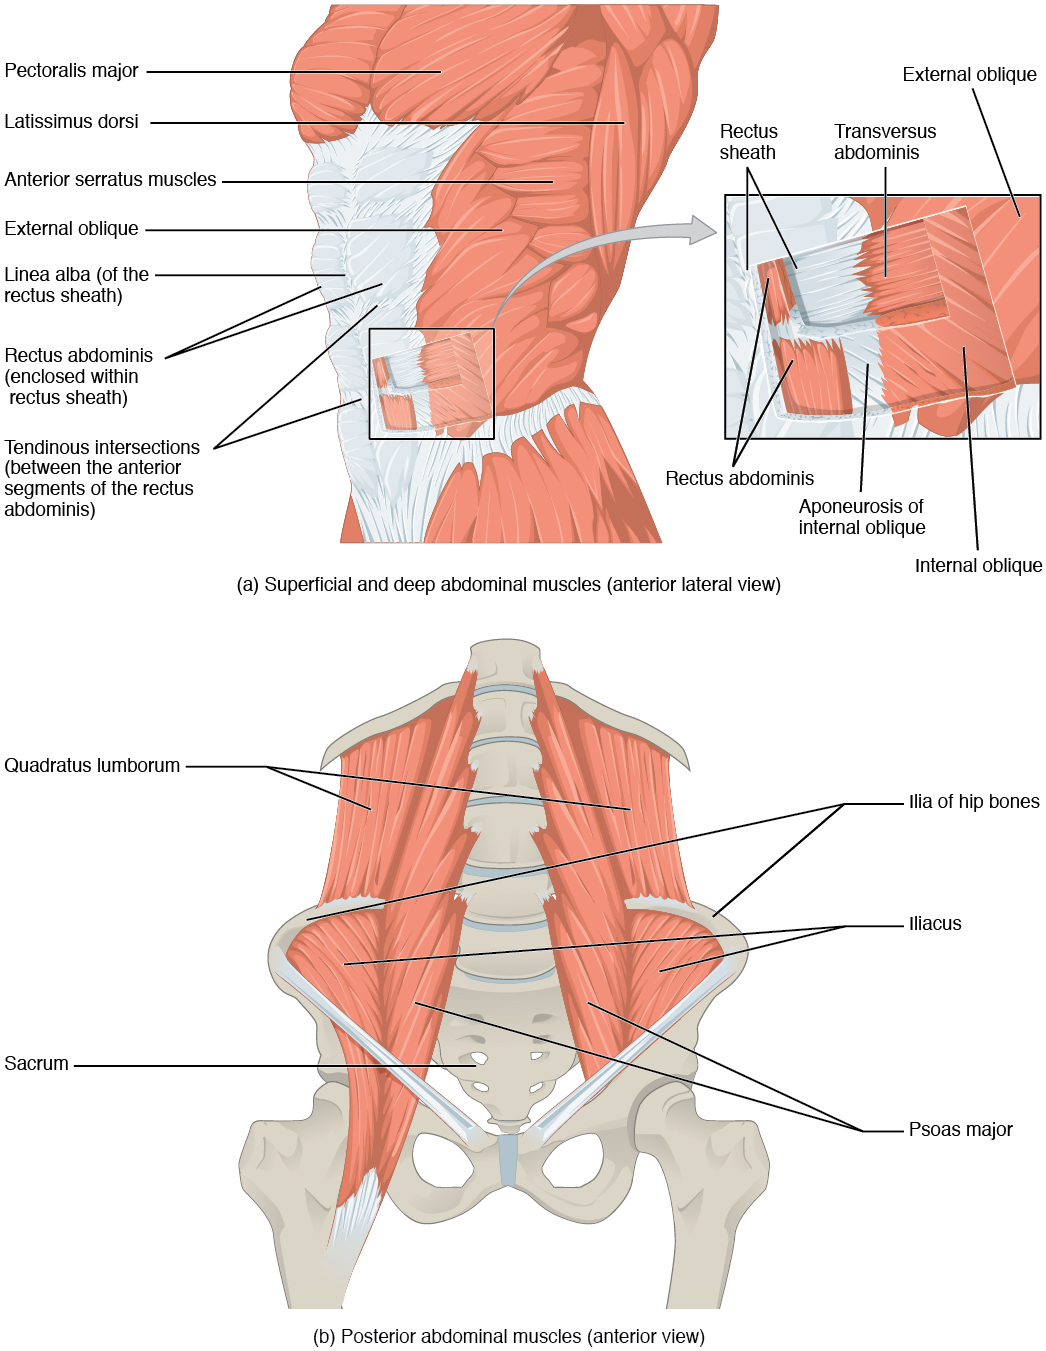 Anterior lateral view of muscles of the abdomen; anterior view of the posterior muscles of the abdomen